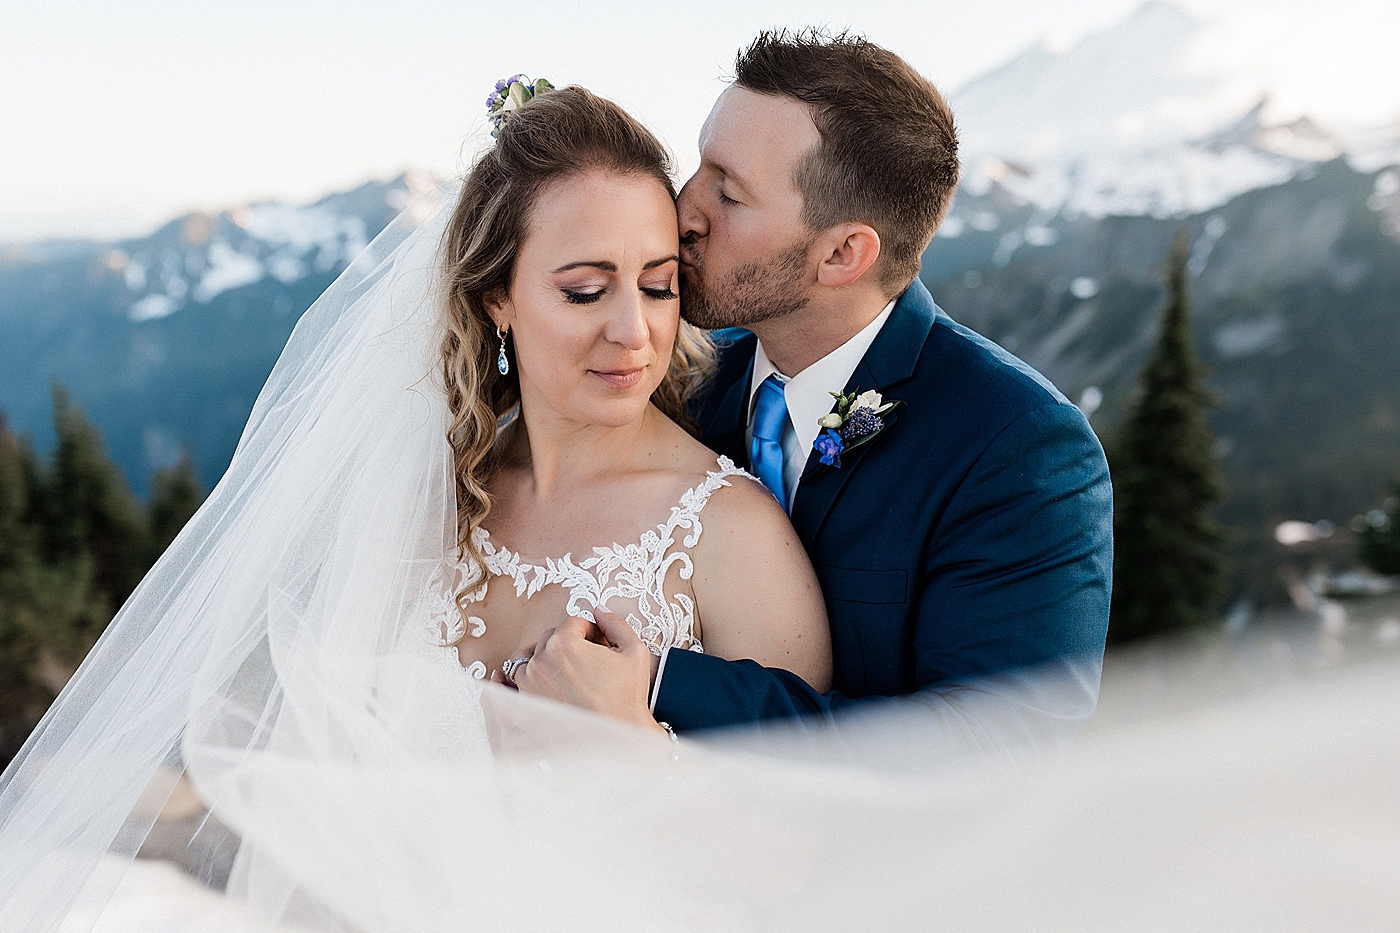 Bride and groom portraits at Artist Point. Photos by Megan Montalvo Photography.